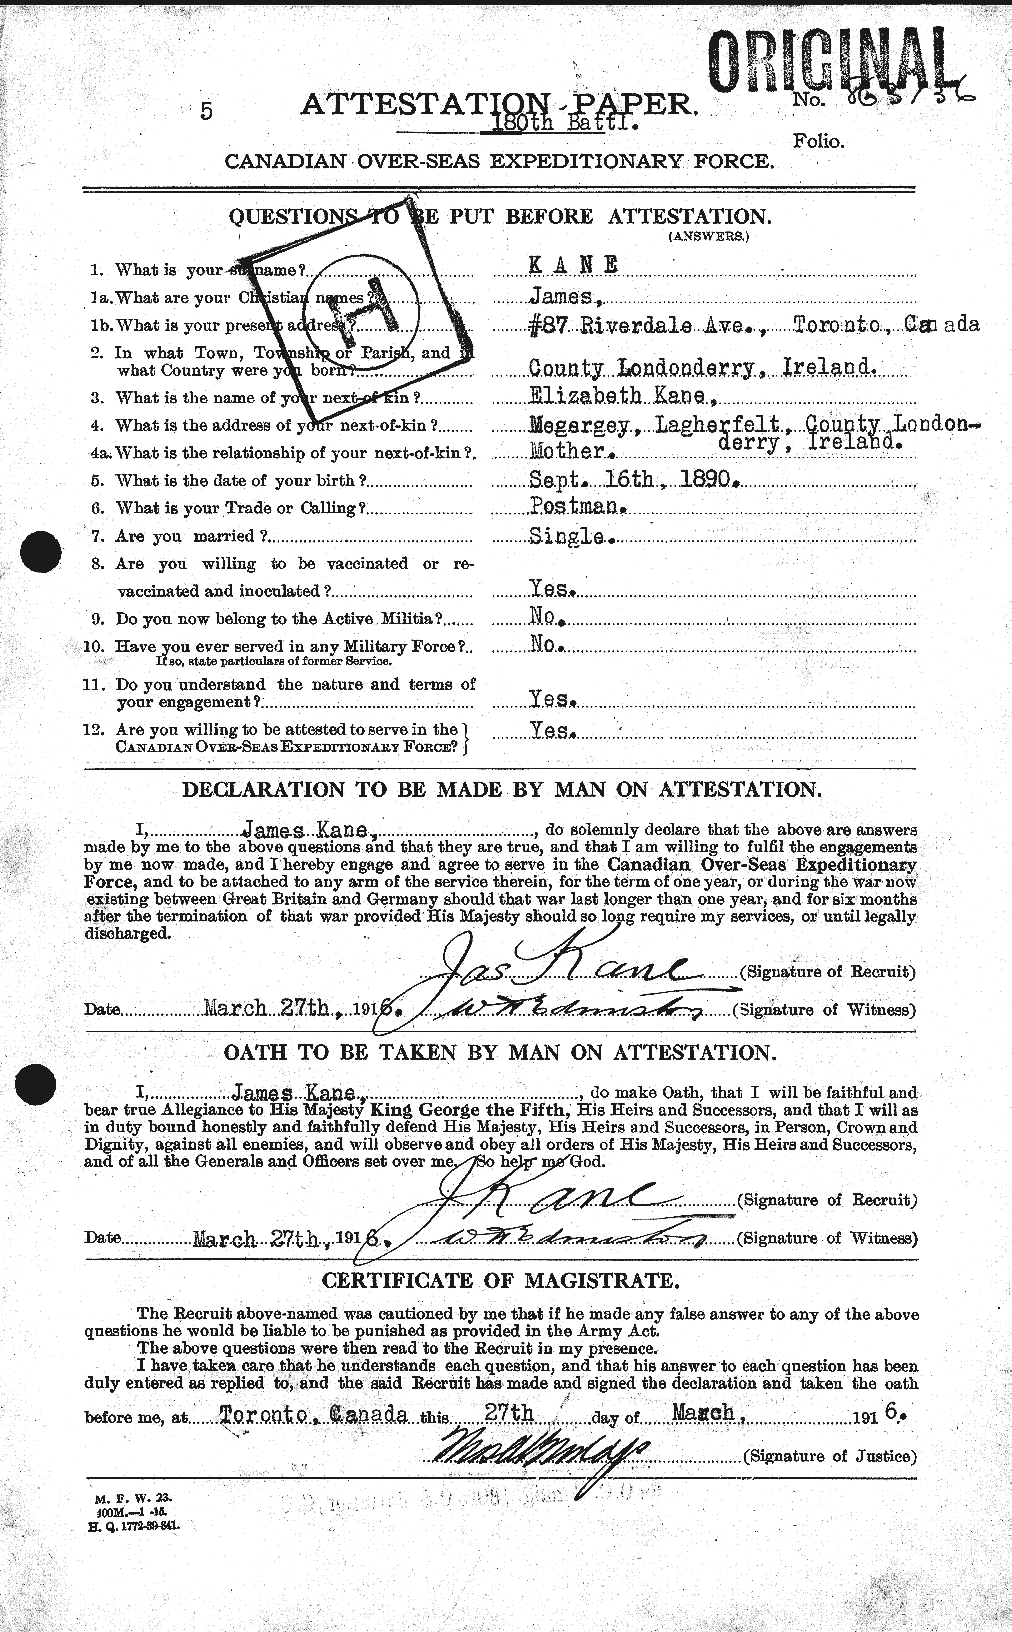 Personnel Records of the First World War - CEF 431570a